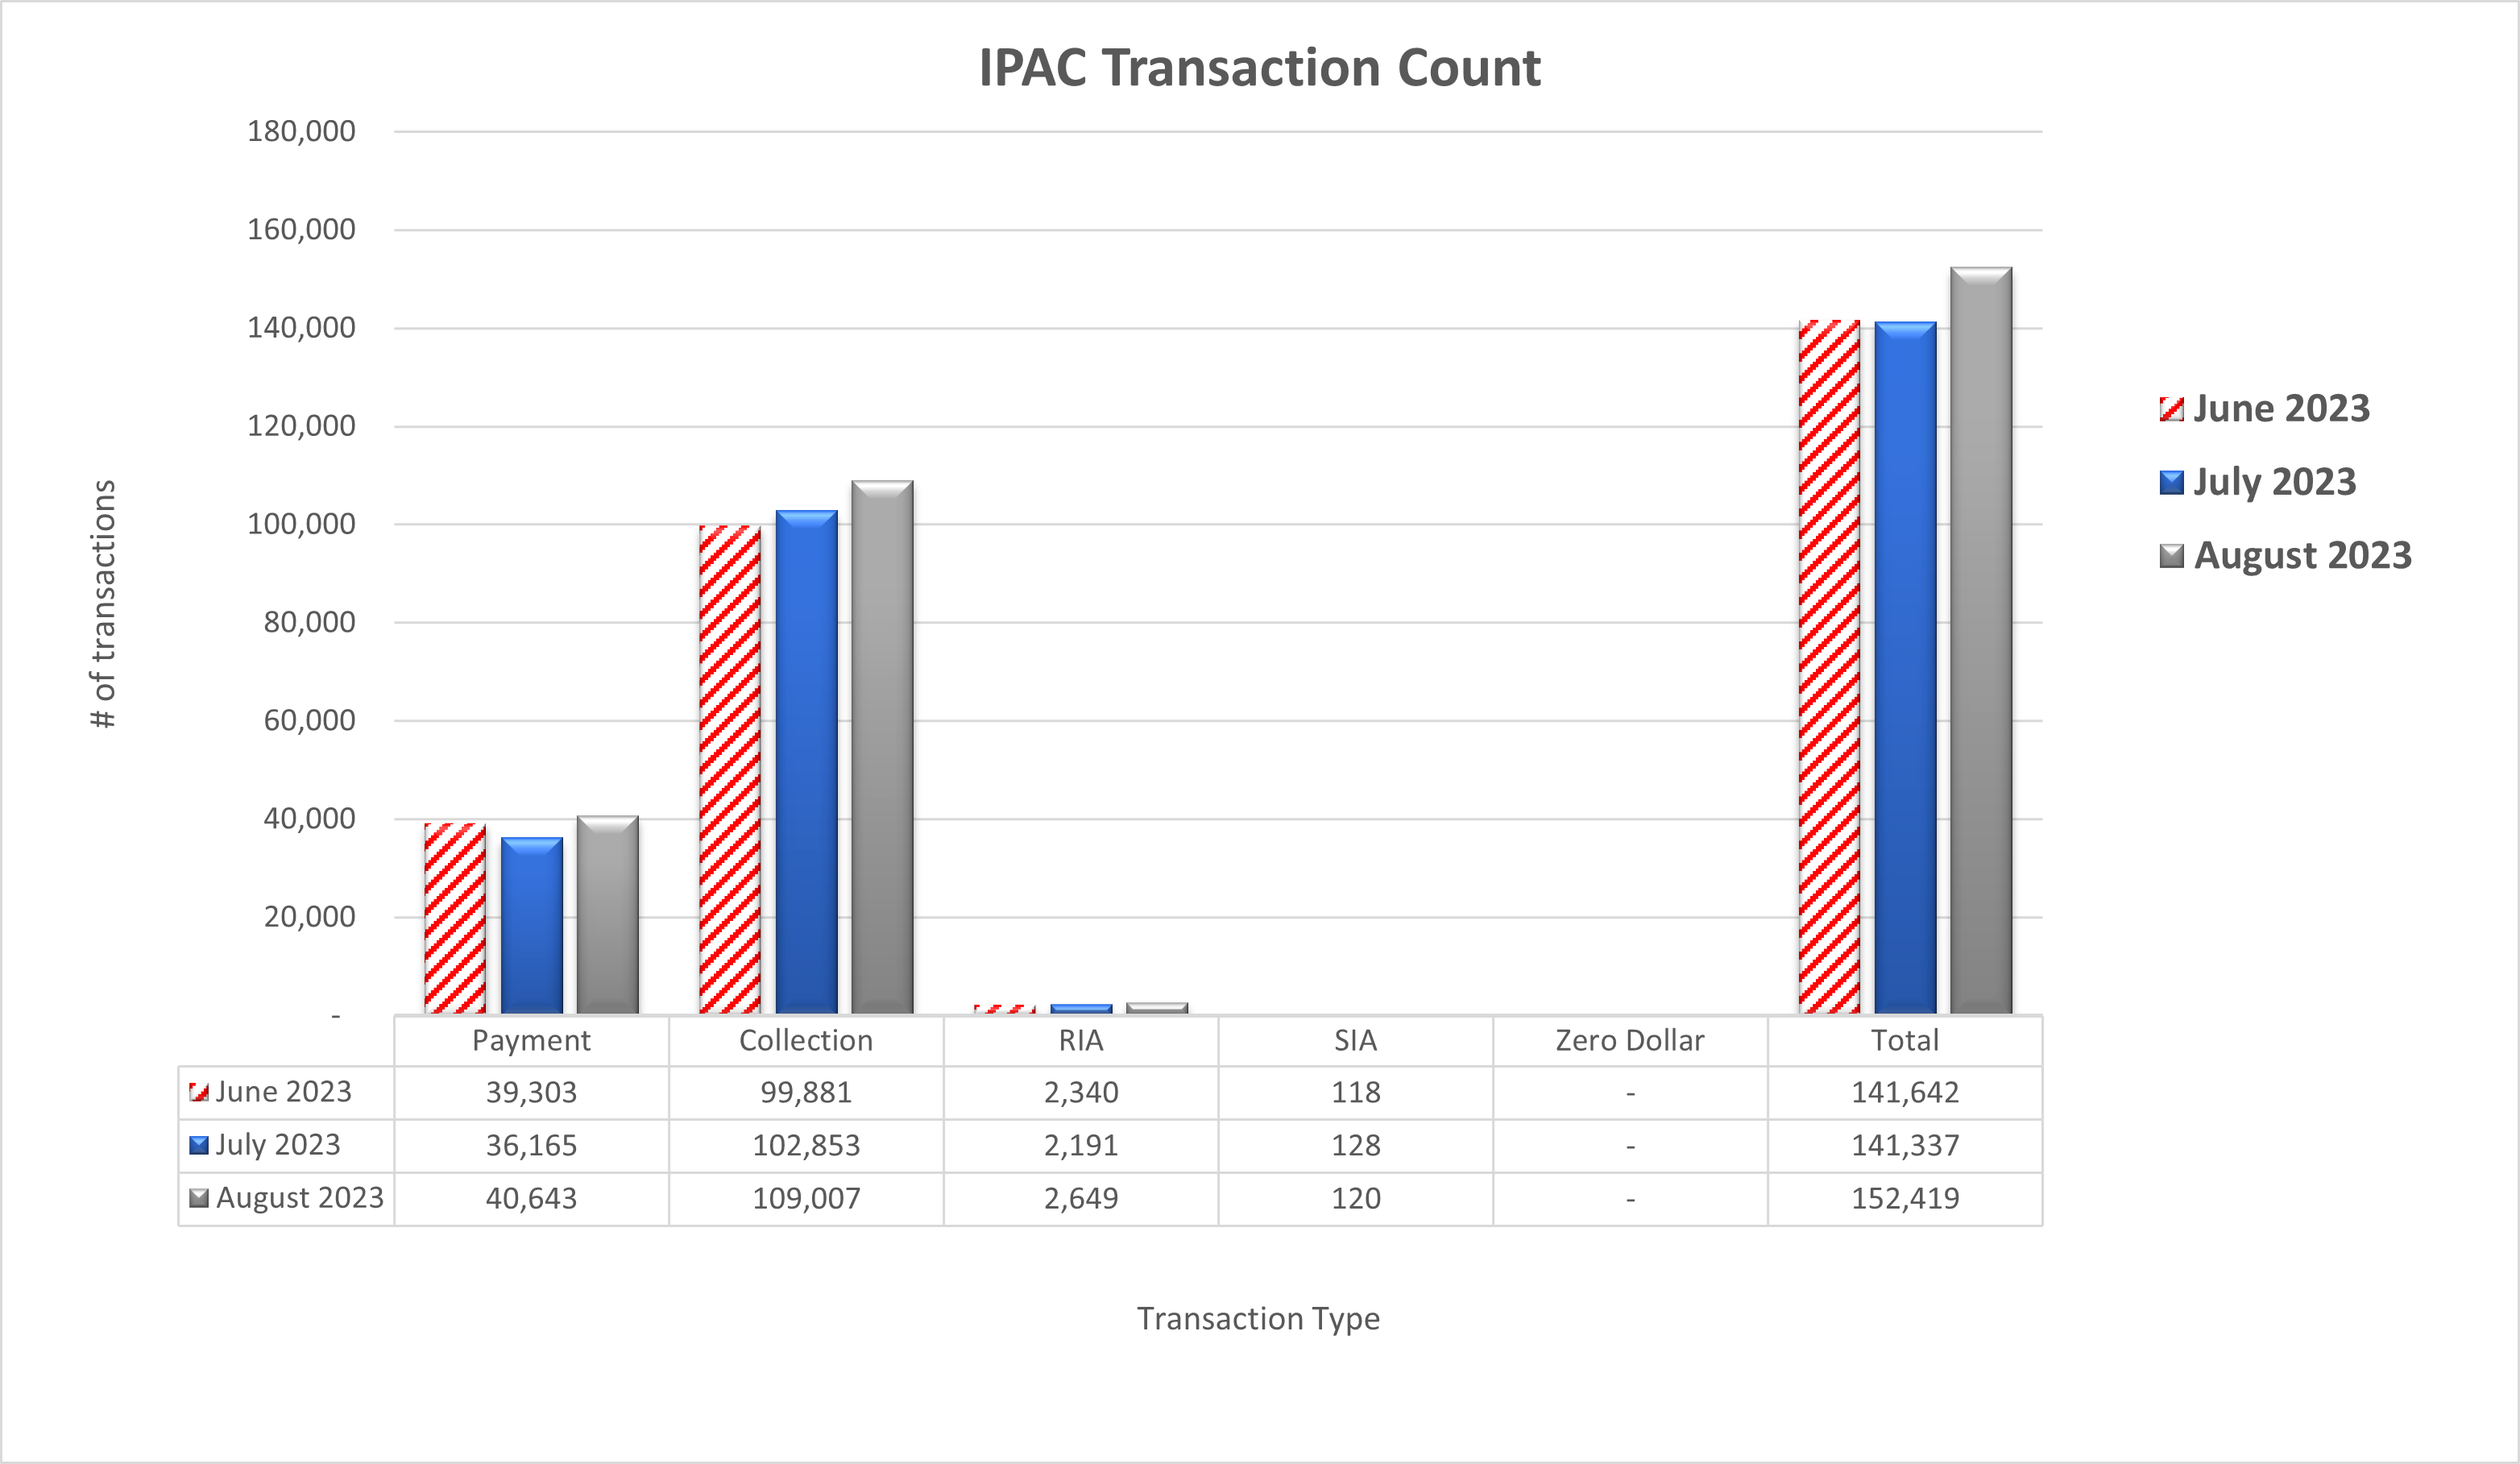 IPAC Transaction Count June 2023 through August 2023